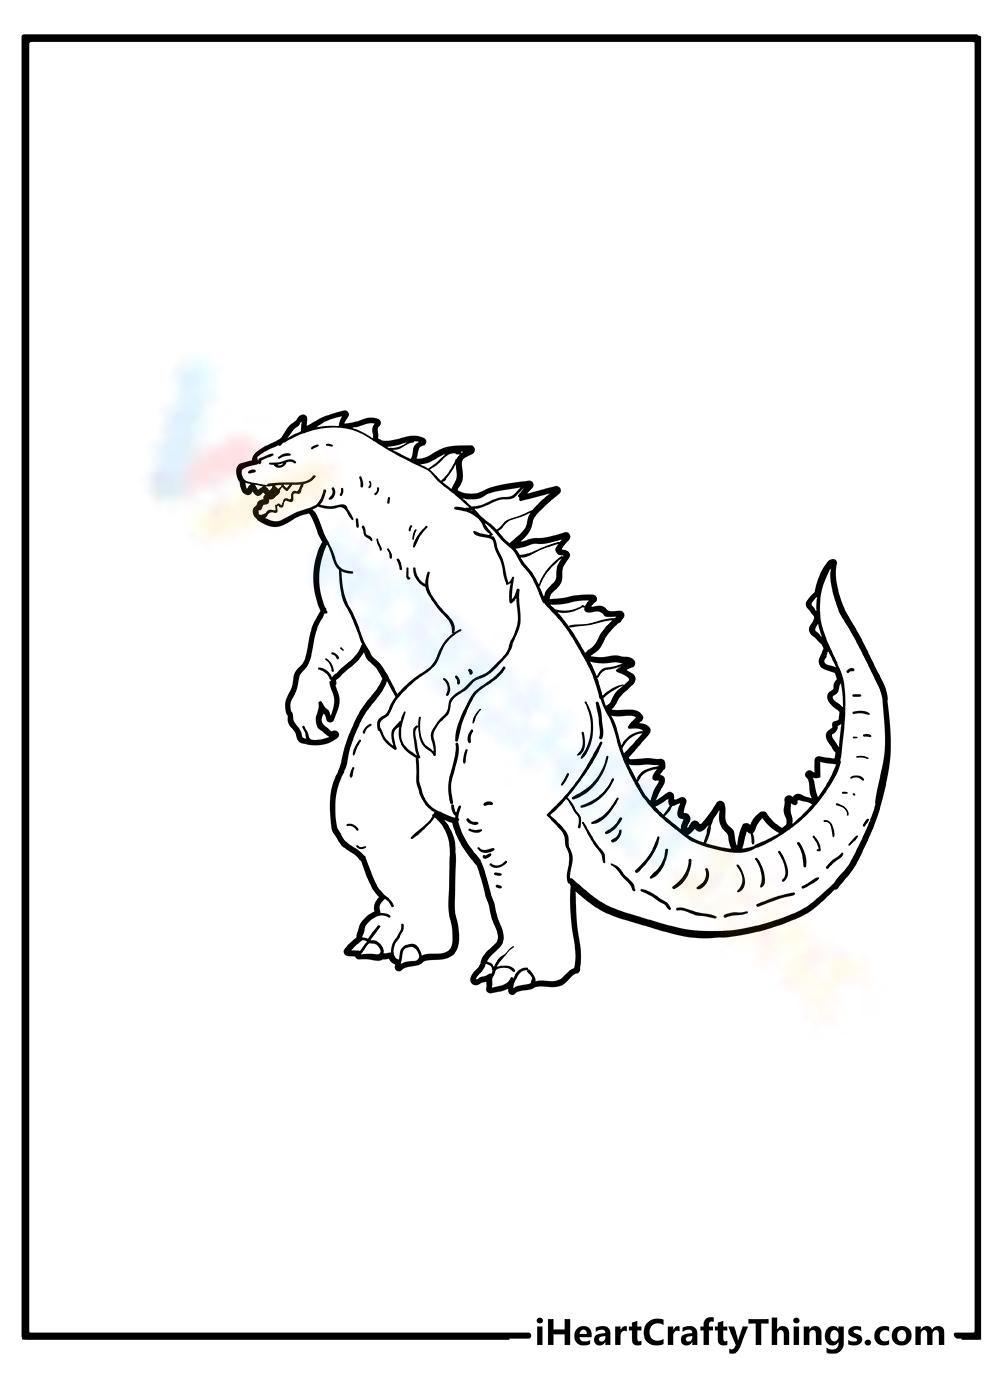 Free printable godzilla coloring pages for kids adults